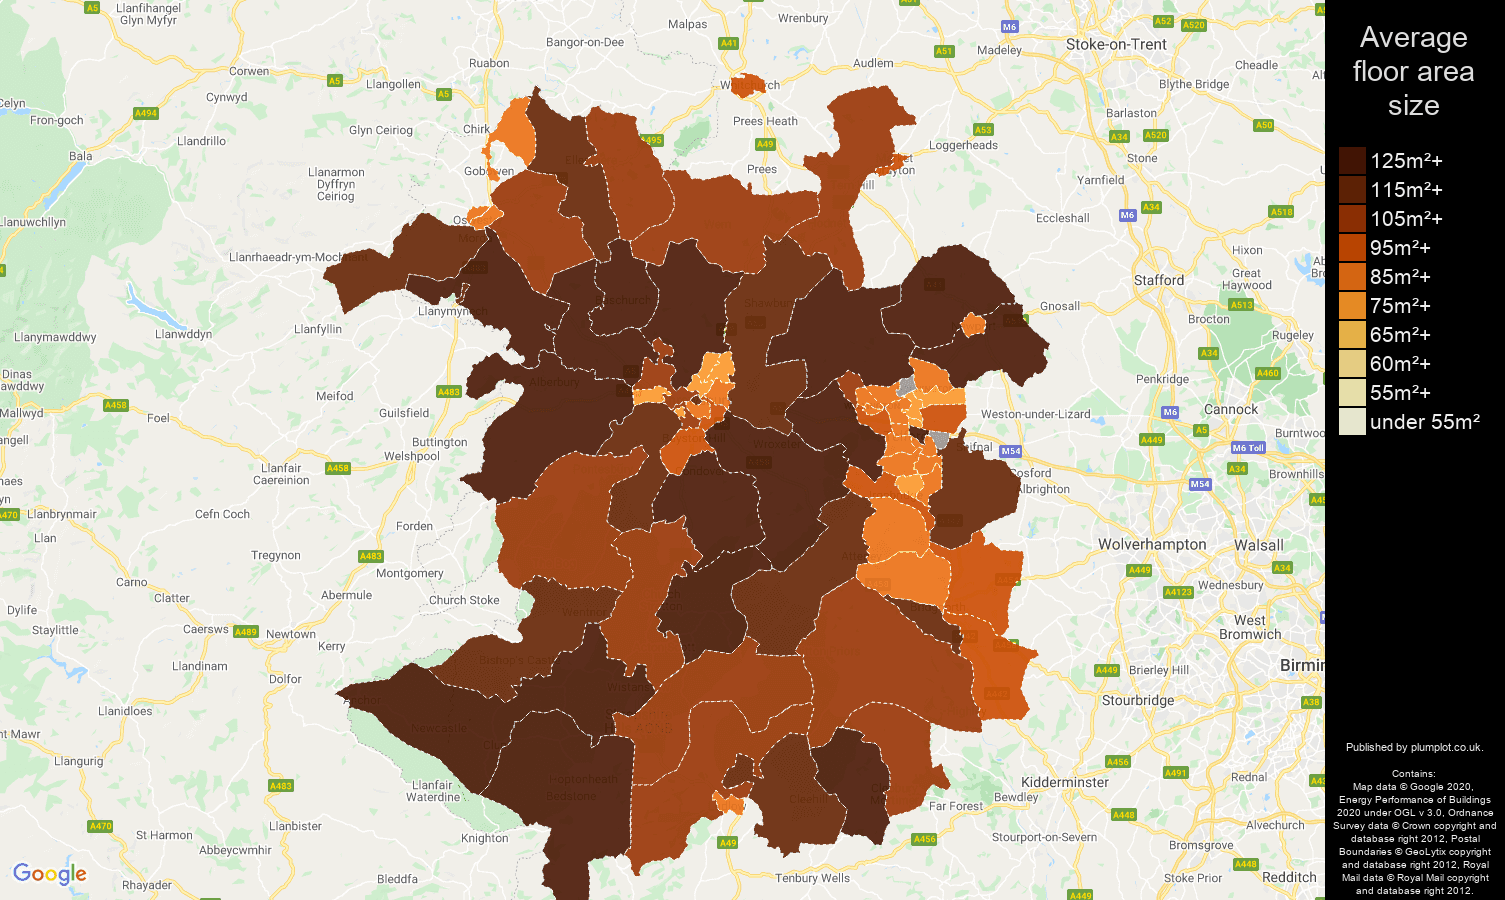 Shropshire map of average floor area size of houses